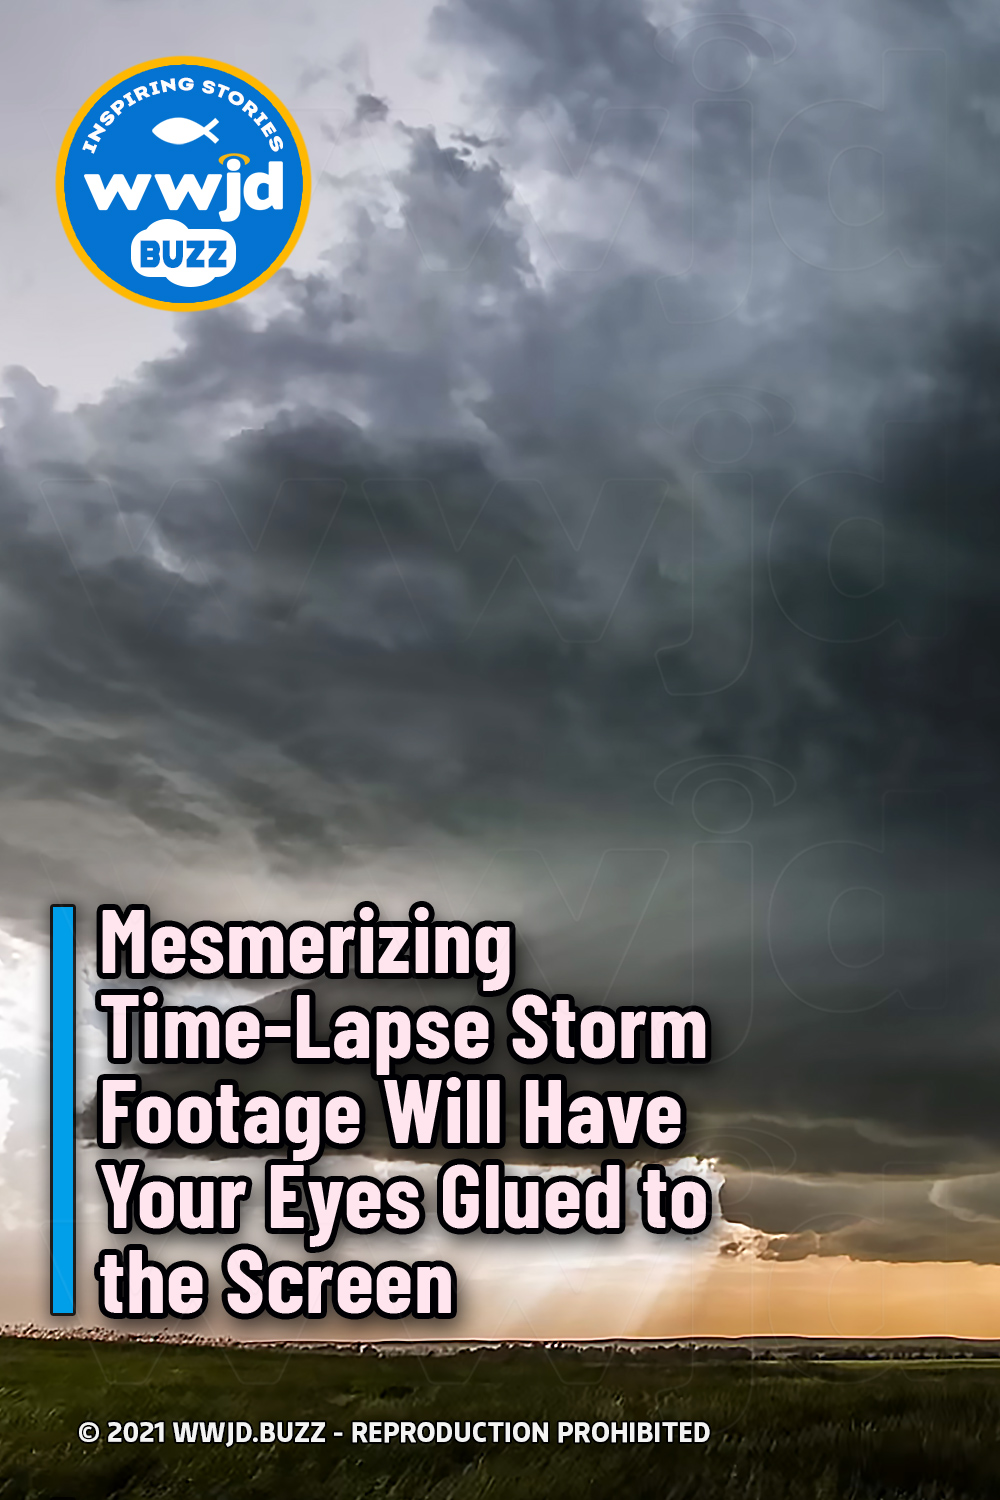 Mesmerizing Time-Lapse Storm Footage Will Have Your Eyes Glued to the Screen